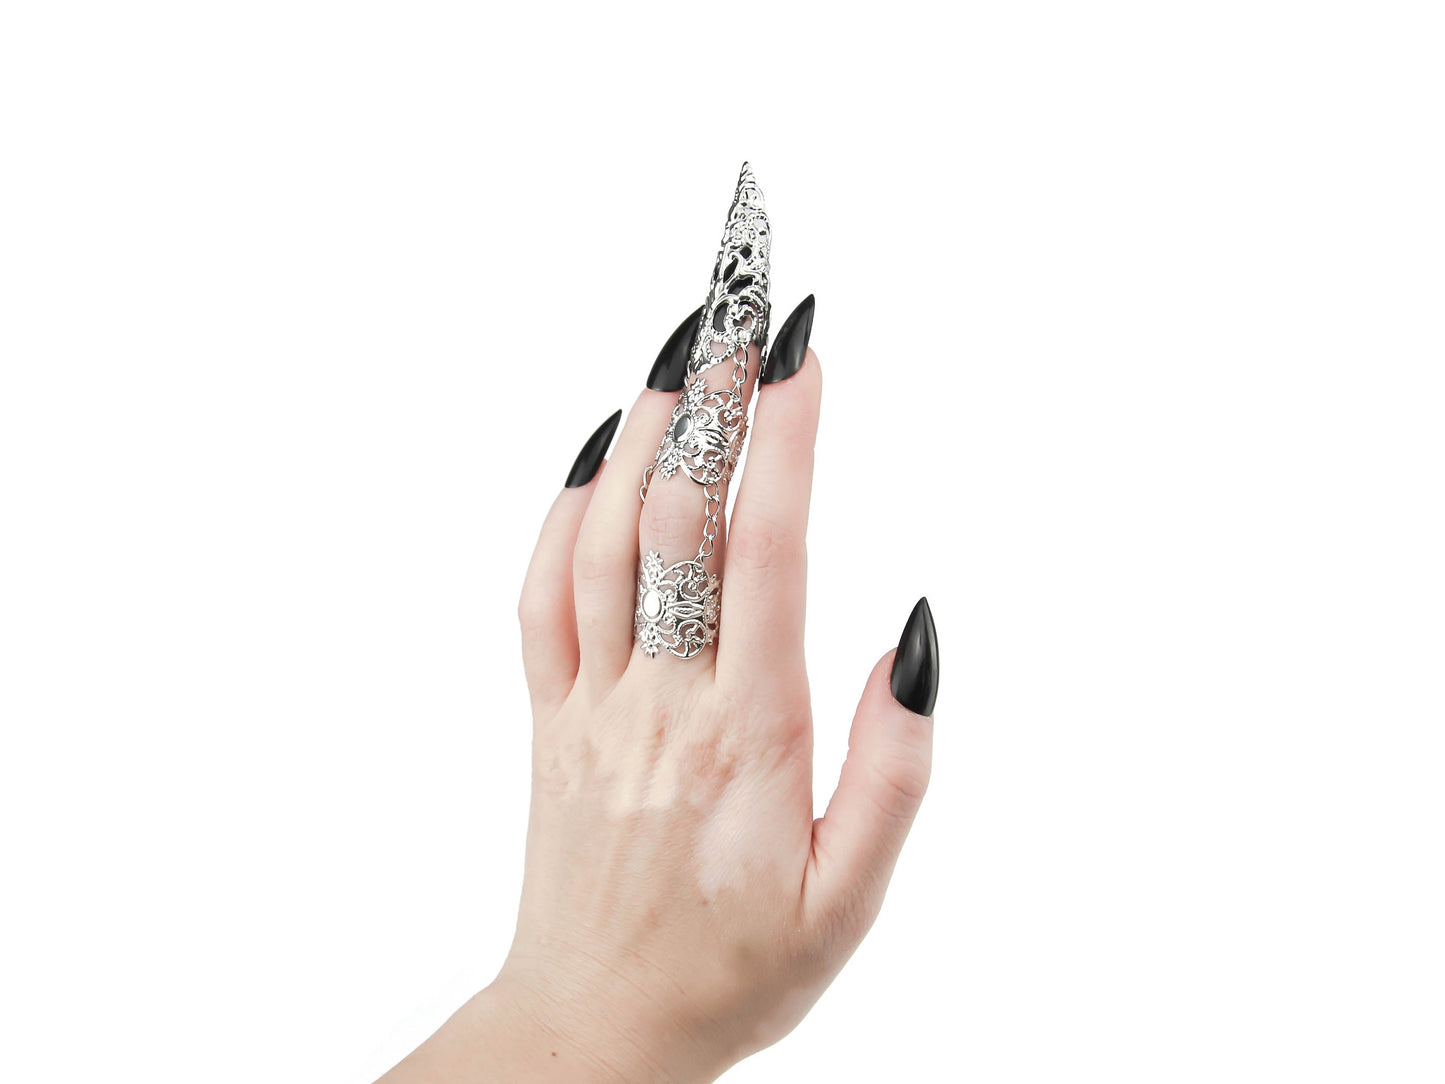 Showcased is a Myril Jewels full finger double ring, culminating in a long, ornate claw over the nail, exemplifying neo-goth jewelry design. The silver hue of the piece contrasts with the wearer's dark nail polish, highlighting the brand's dark-avantgarde aesthetic. This claw ring is ideal for those drawn to gothic-chic and witchcore styles, making it a perfect accessory for Halloween, everyday wear, or as an eye-catching addition to rave party and festival outfits.